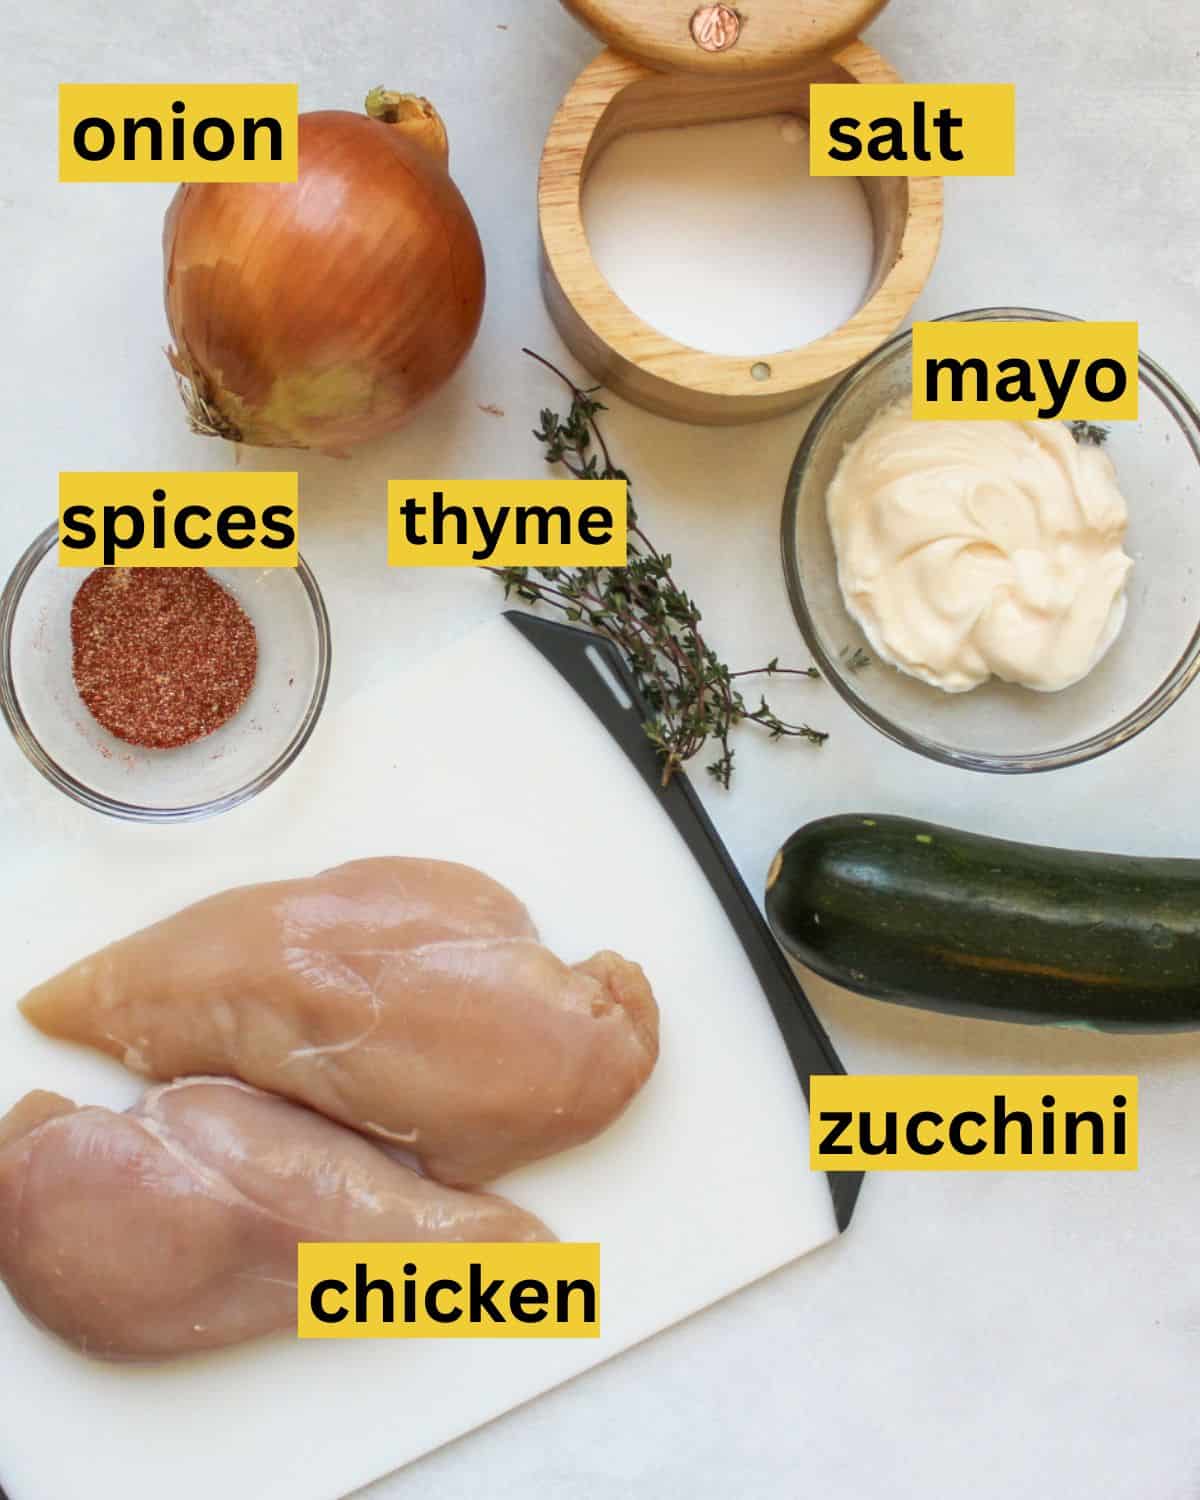 All the recipe ingredients arranged on a white background, each labeled onion, spices, chicken, salt, thyme, mayo, zucchini.